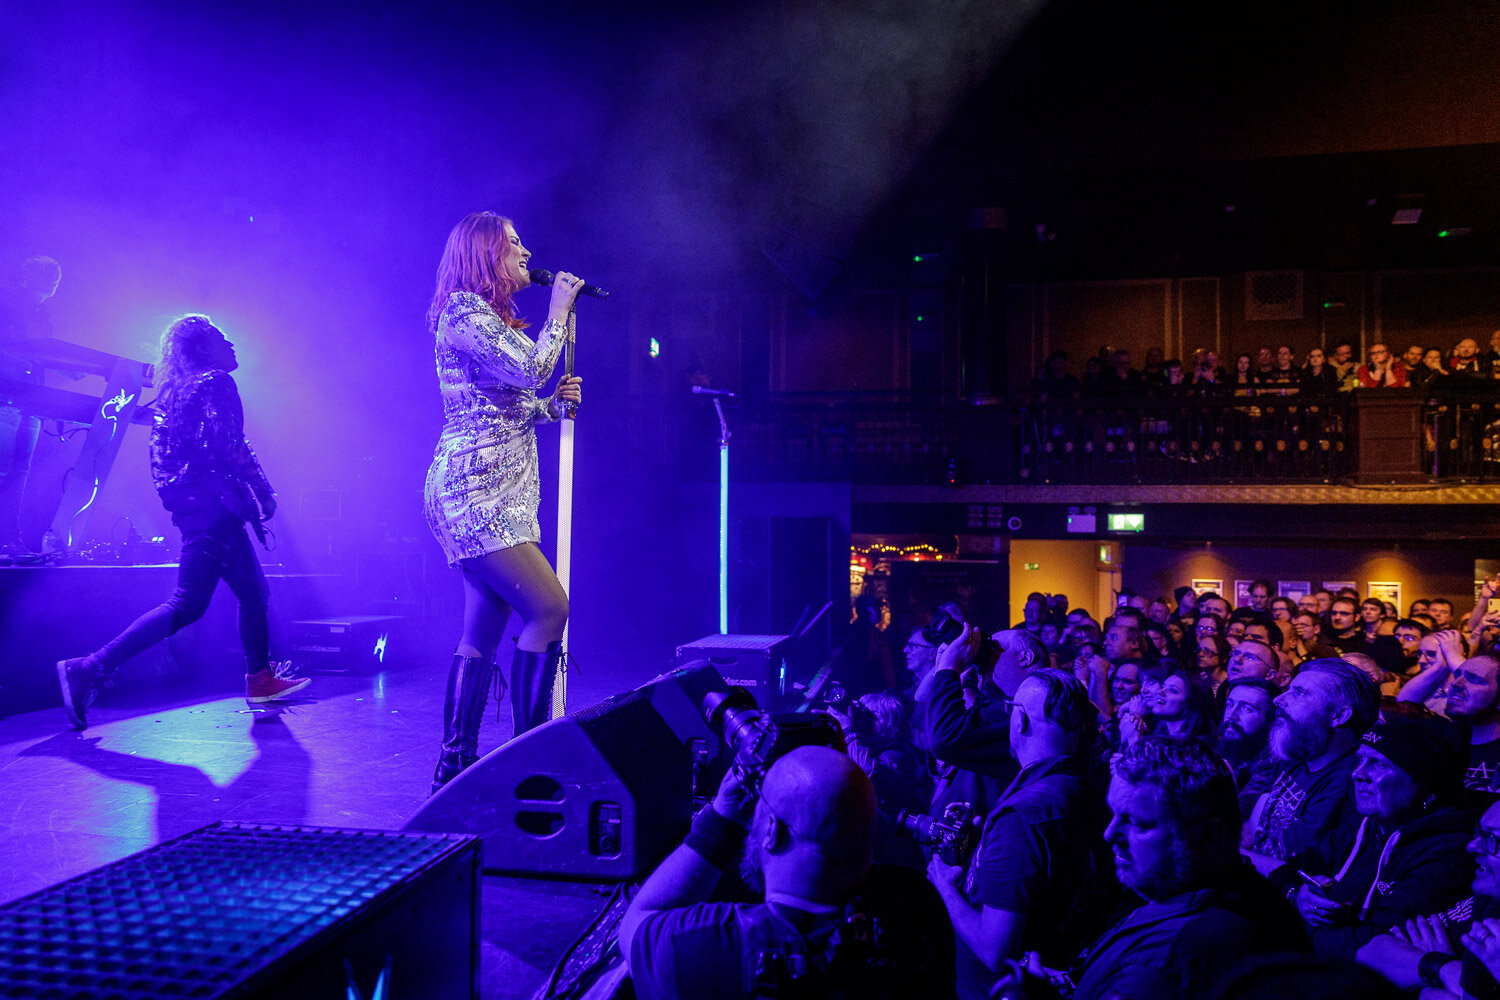 Delain at the O2 Ritz in Manchester on February 7th 2020